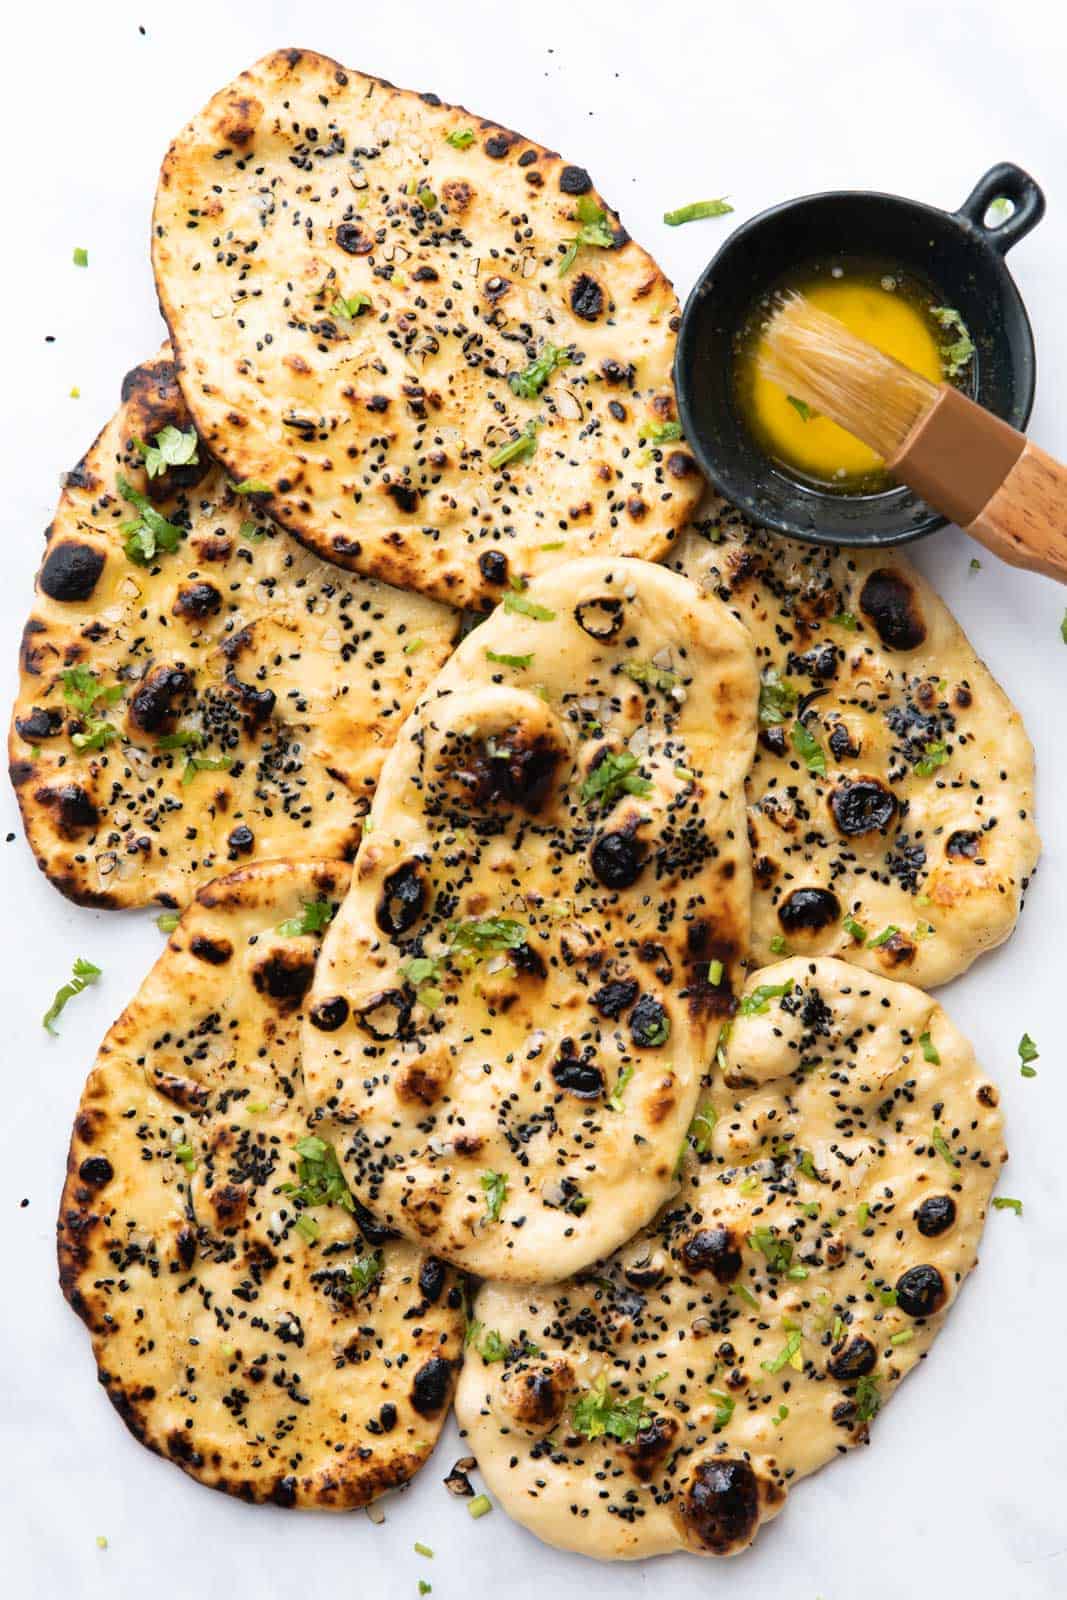 The naan bread made without yeast.